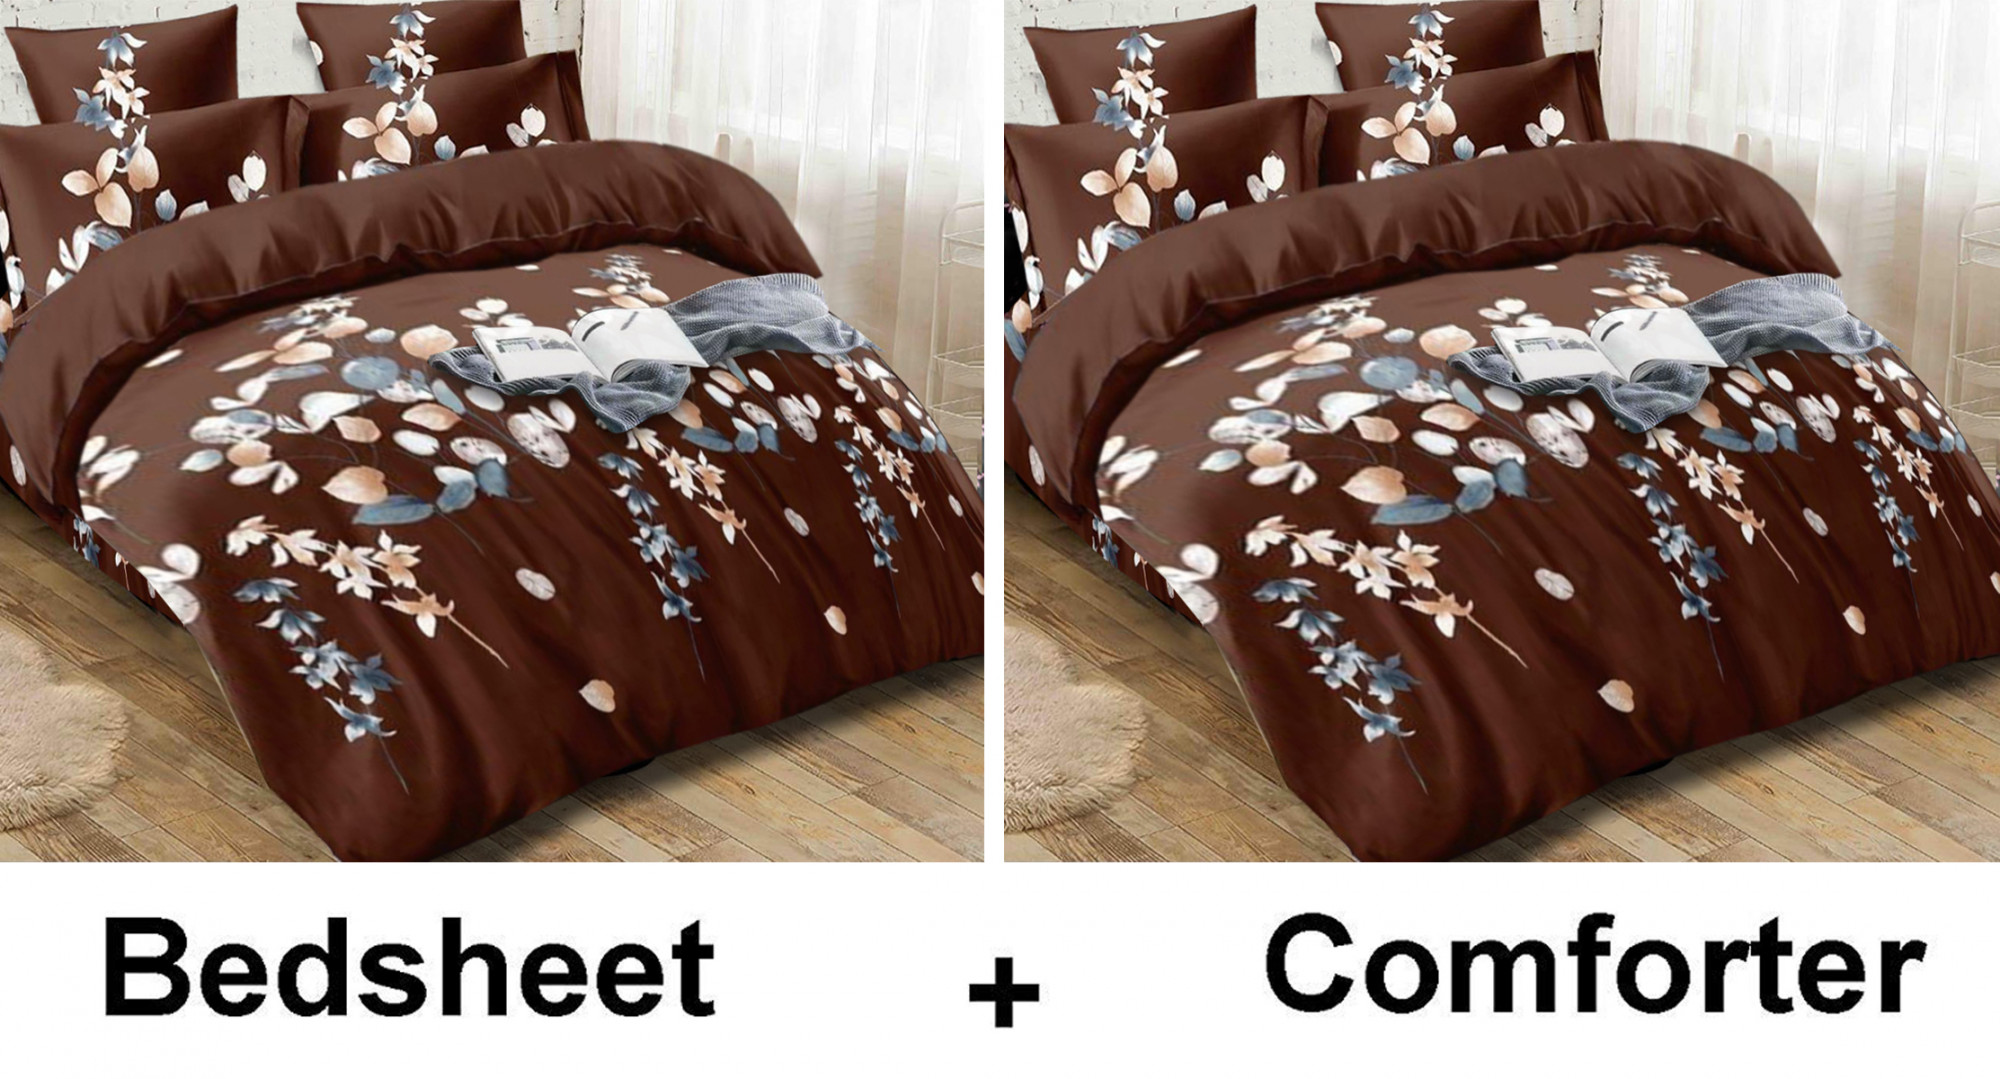 Kuber Industries Leaf Print Glace Cotton AC Comforter King Size Bed Comforter, Double Bed Sheet, 2 Pillow Cover (Brown, 90x100 Inches)-Set of 4 Pieces